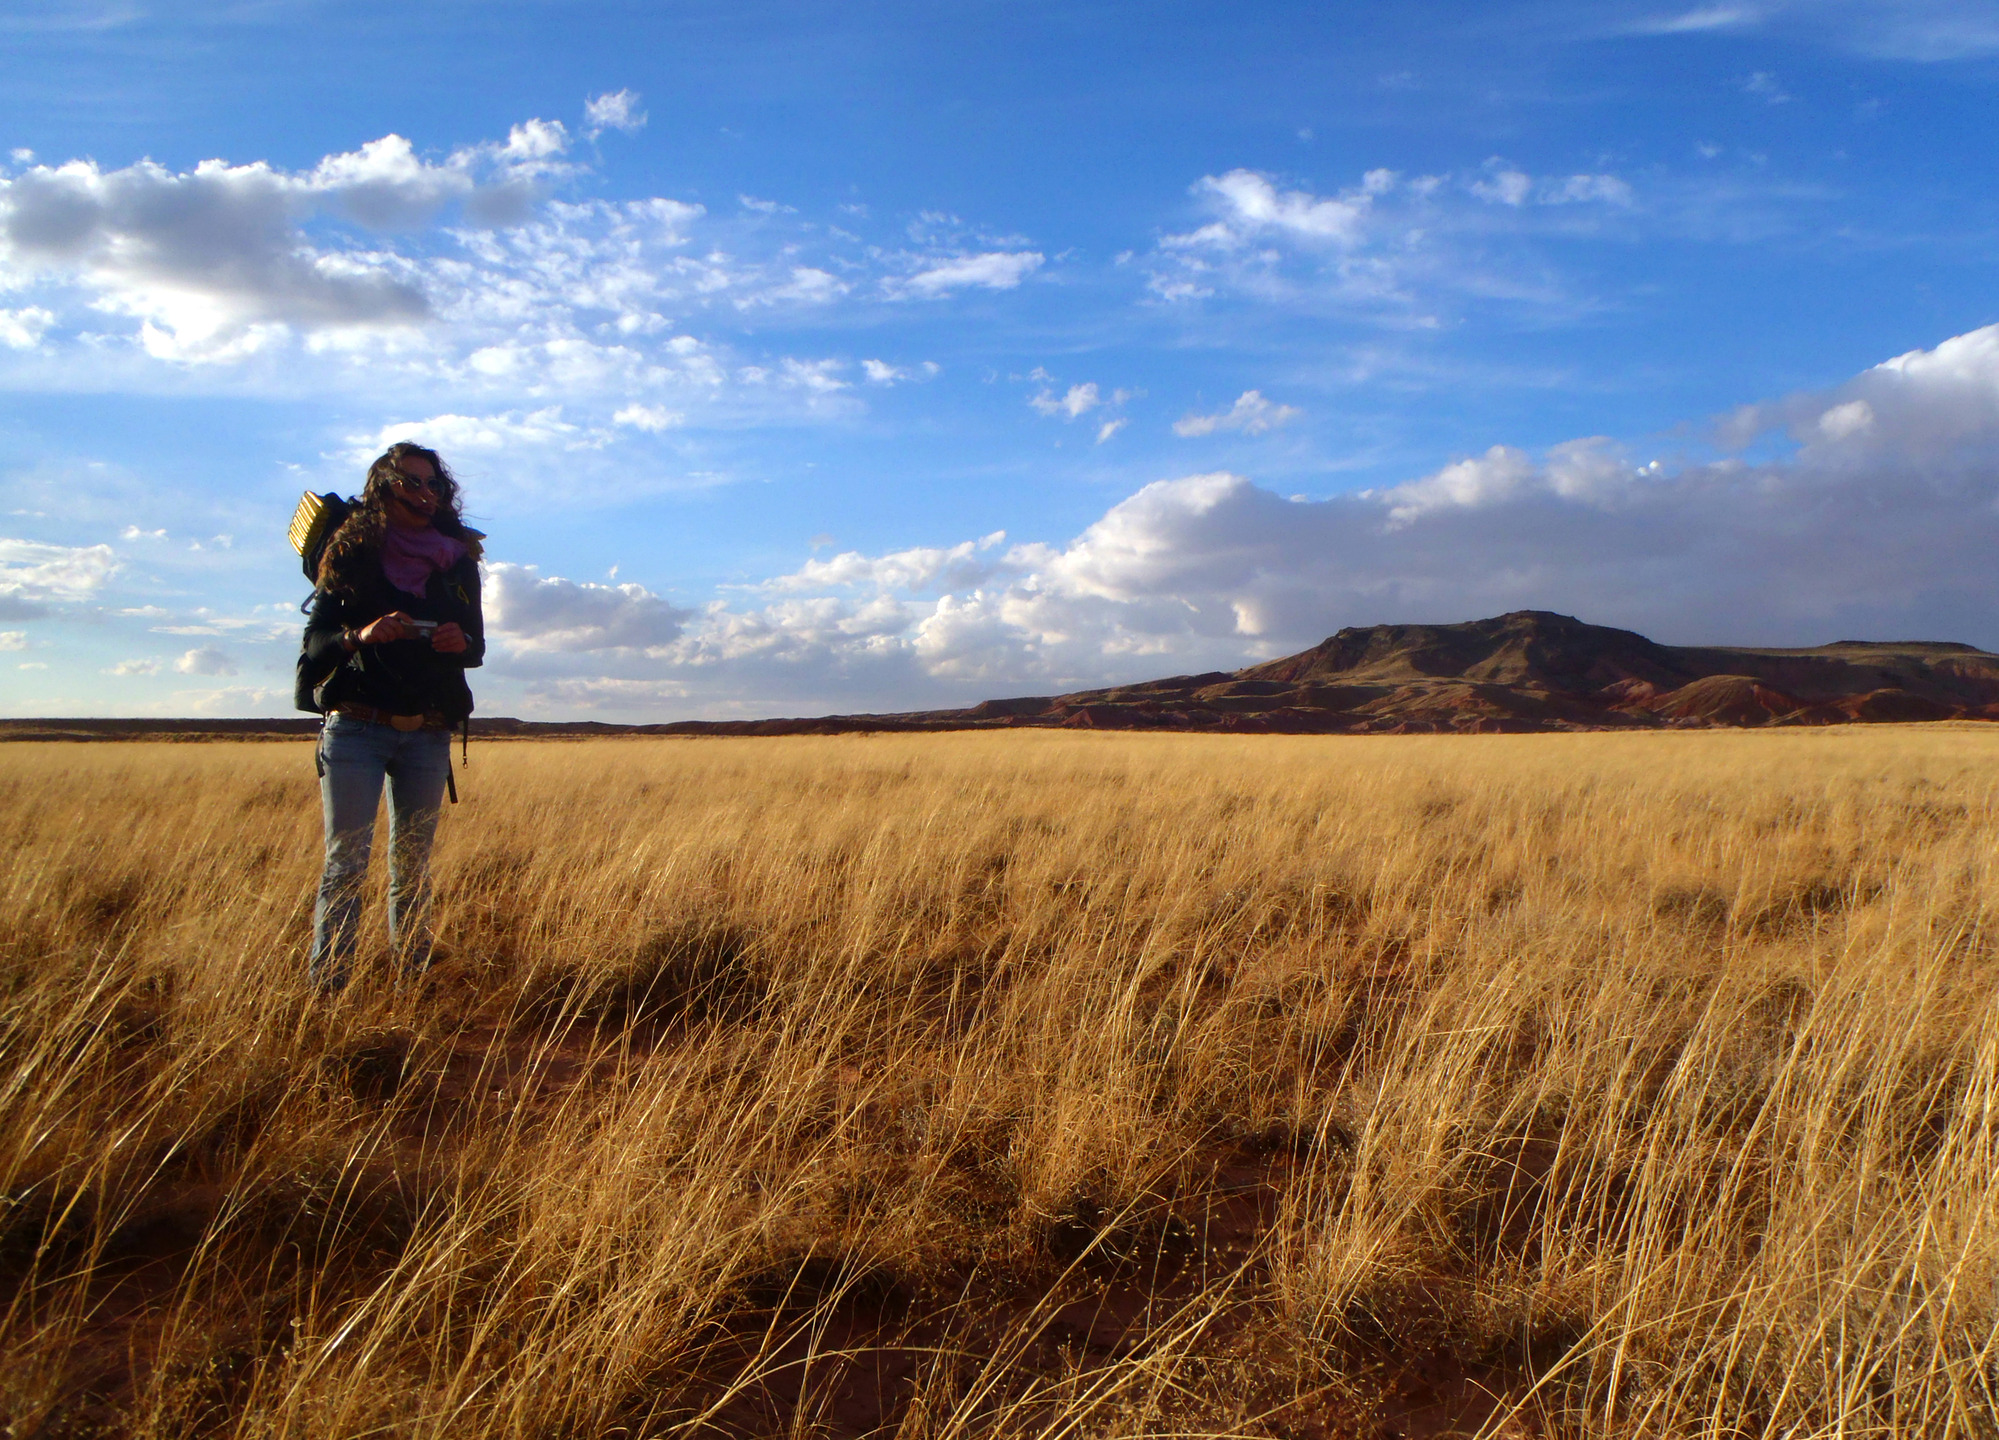 Backpacker in golden grass on a prairie, dark hill in right background under a partly cloudy sky.